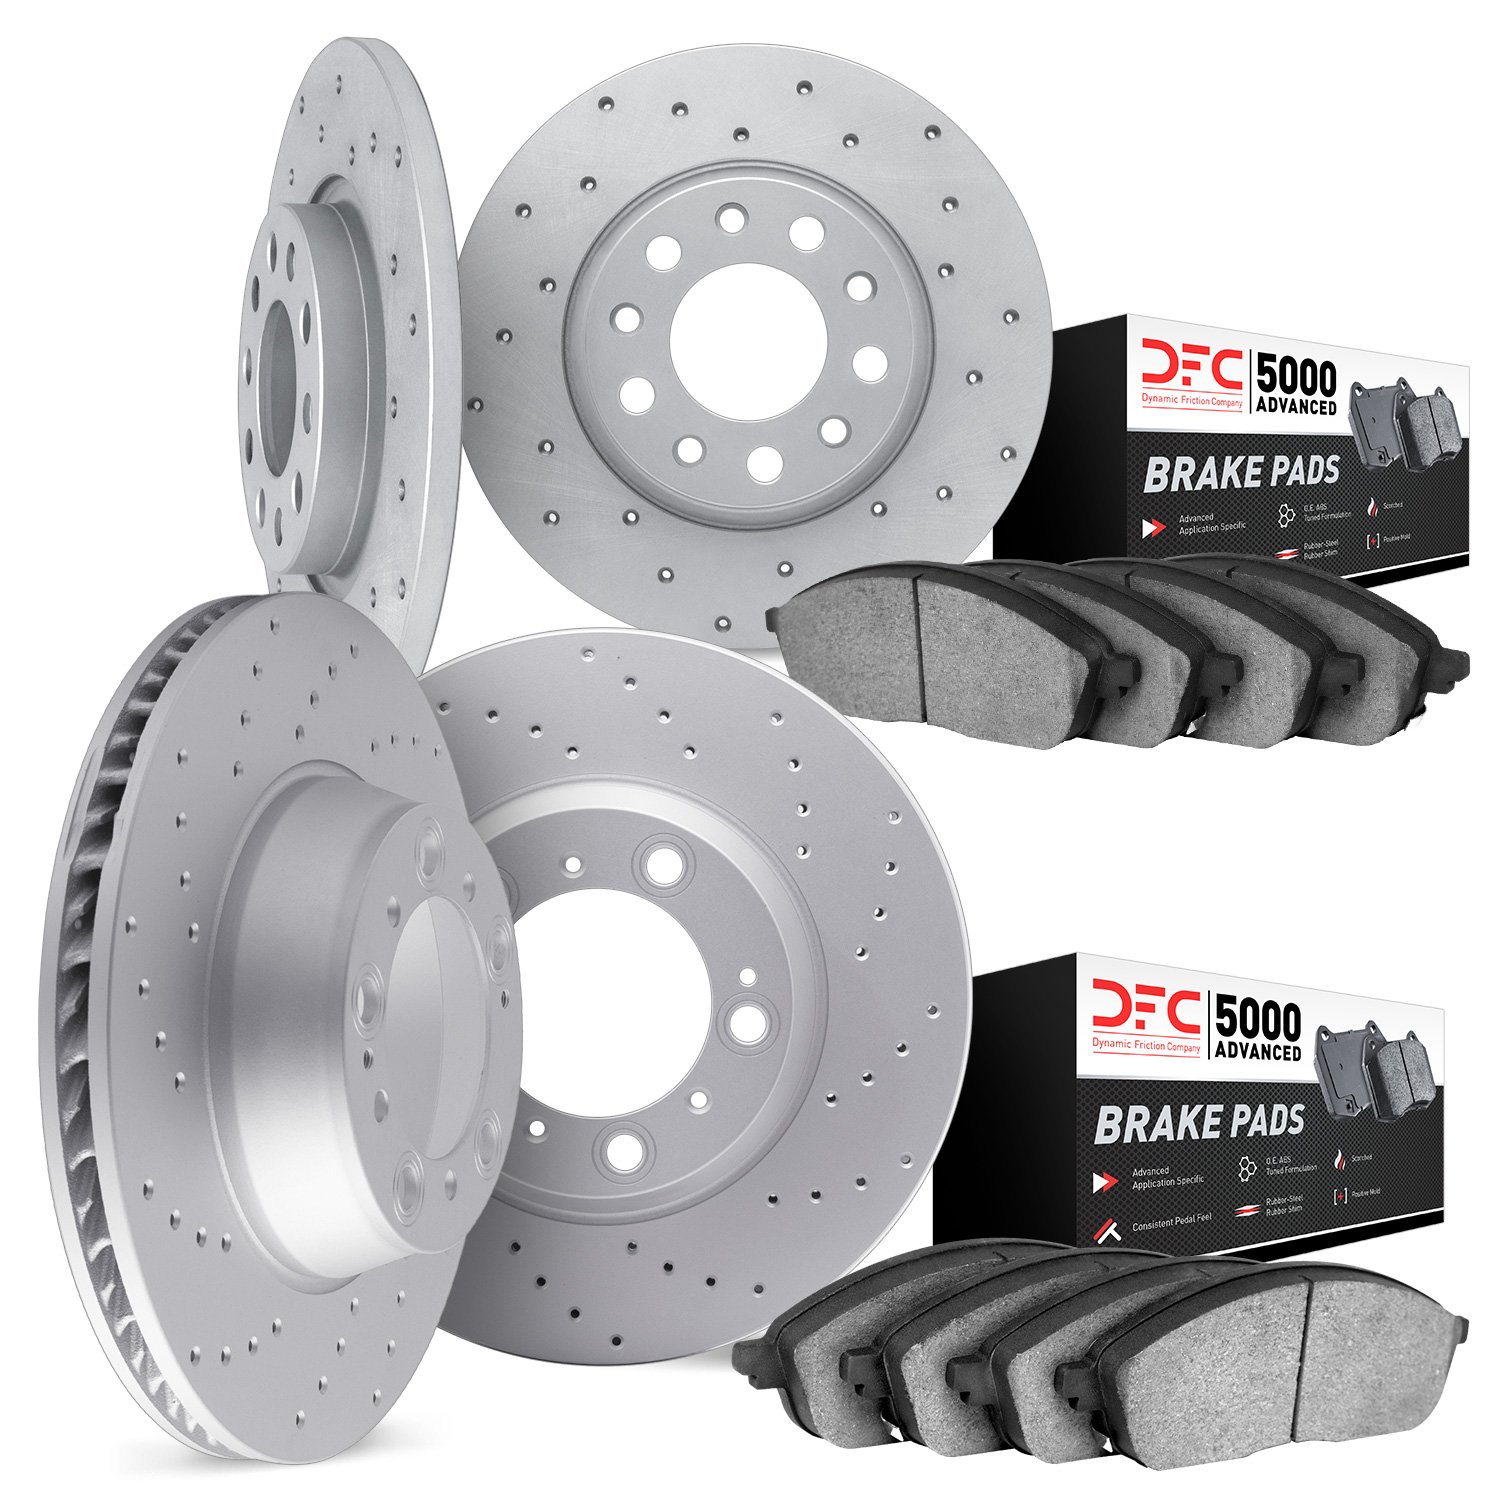 2704-13062 Geoperformance Drilled Brake Rotors with Active Performance Pads Kit, 2005-2009 Subaru, Position: Front and Rear